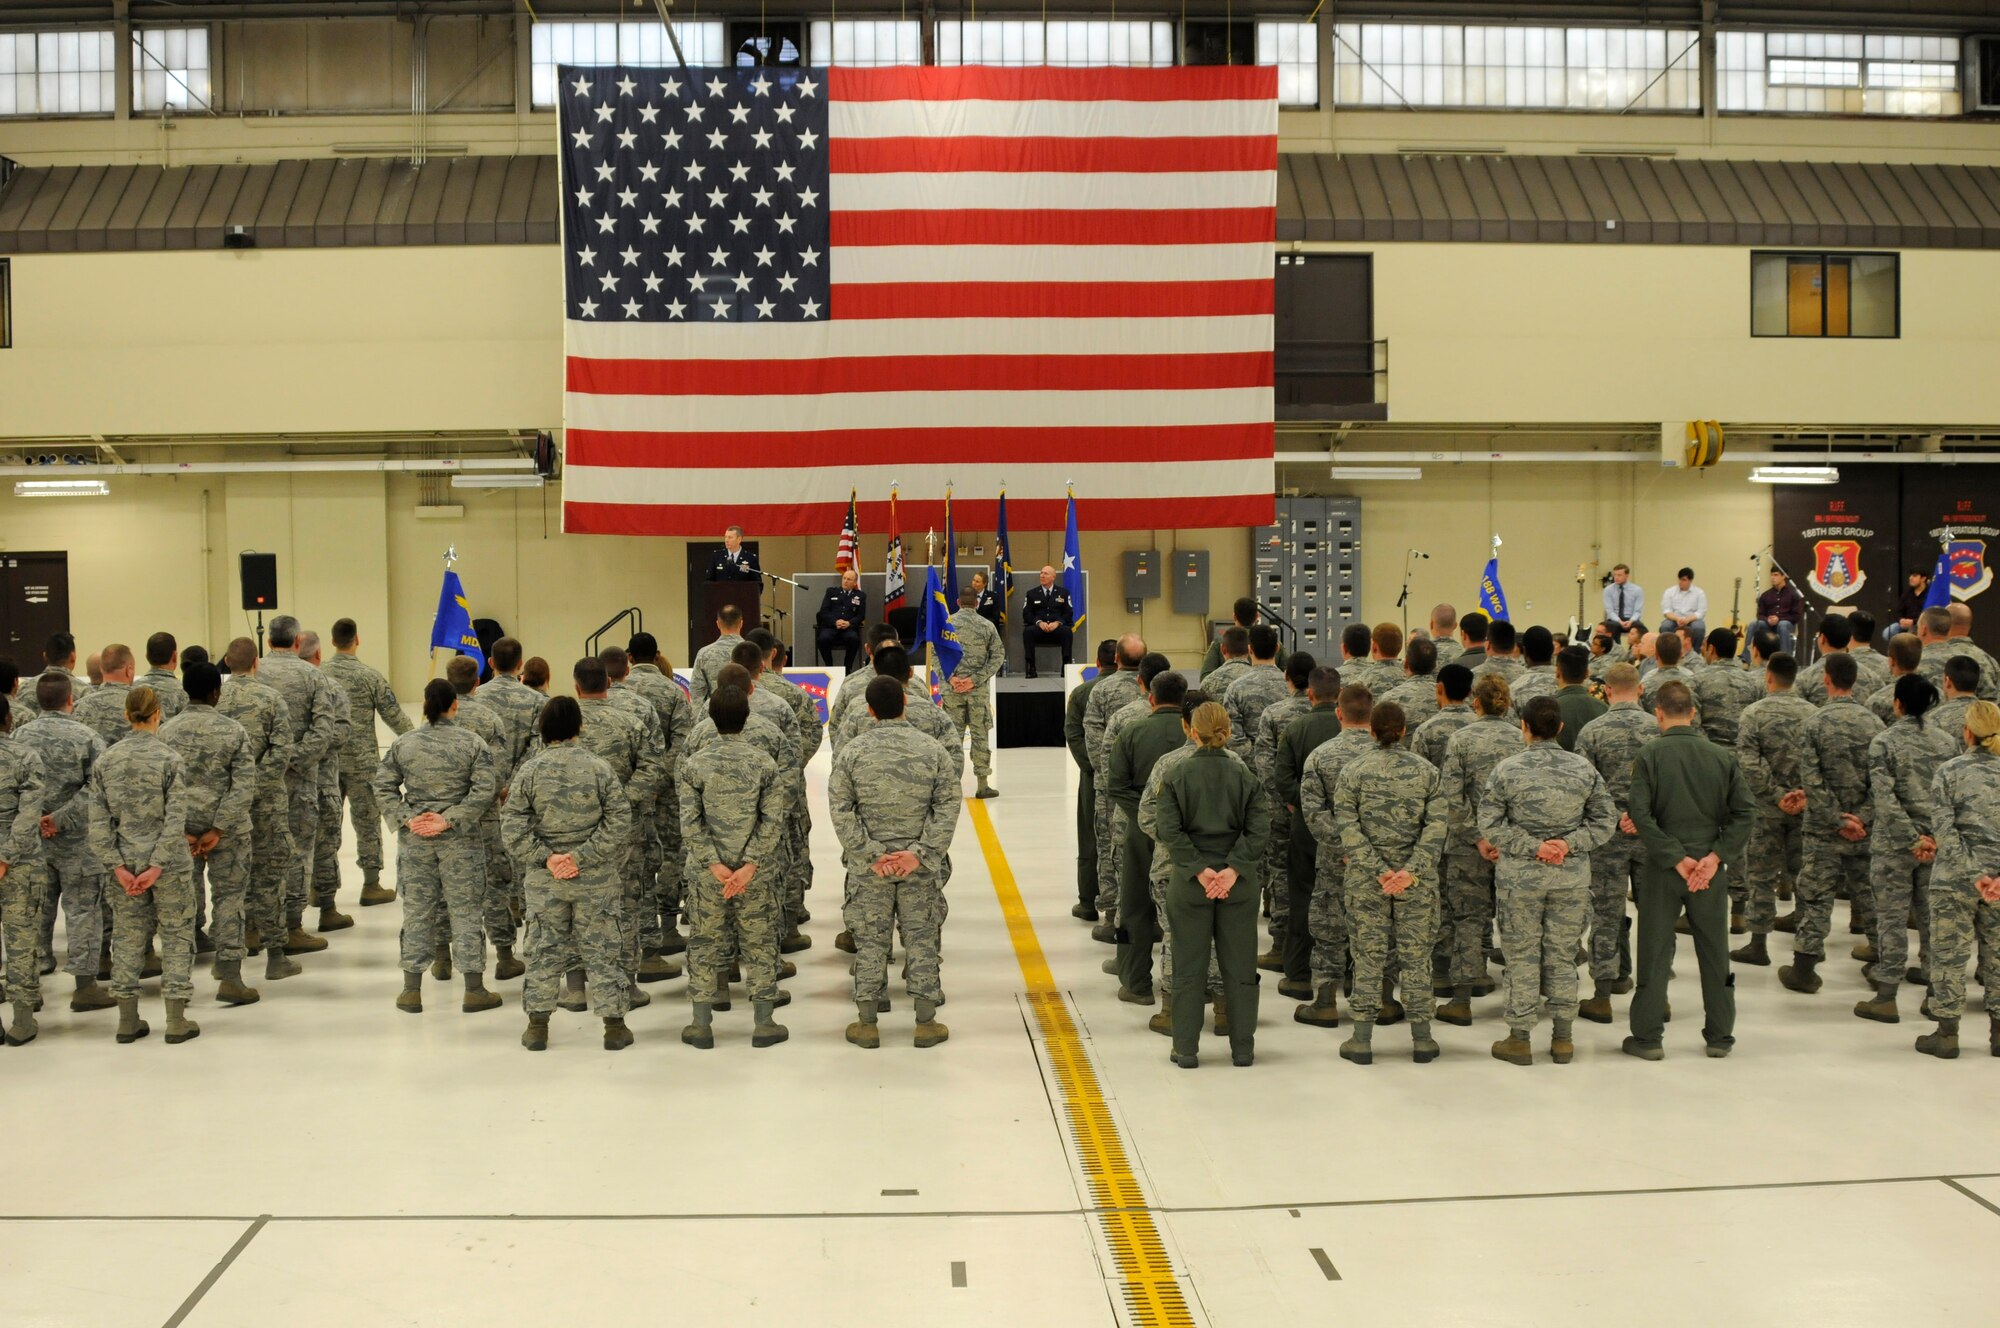 Members of the 188th Wing stand in formation during the 188th Wing change of command ceremony Jan. 11, 2015, held at Ebbing Air National Guard Base, Fort Smith, Ark.  During the ceremony Col. Bobbi Doorenbos became the first female to command the 188th Wing. Doorenbos assumed command after serving as the 214th Reconnaissance Group commander for the Arizona ANG at Davis-Monthan Air Force Base. (U.S. Air National Guard photo by Staff Sgt. Hannah Dickerson/released)